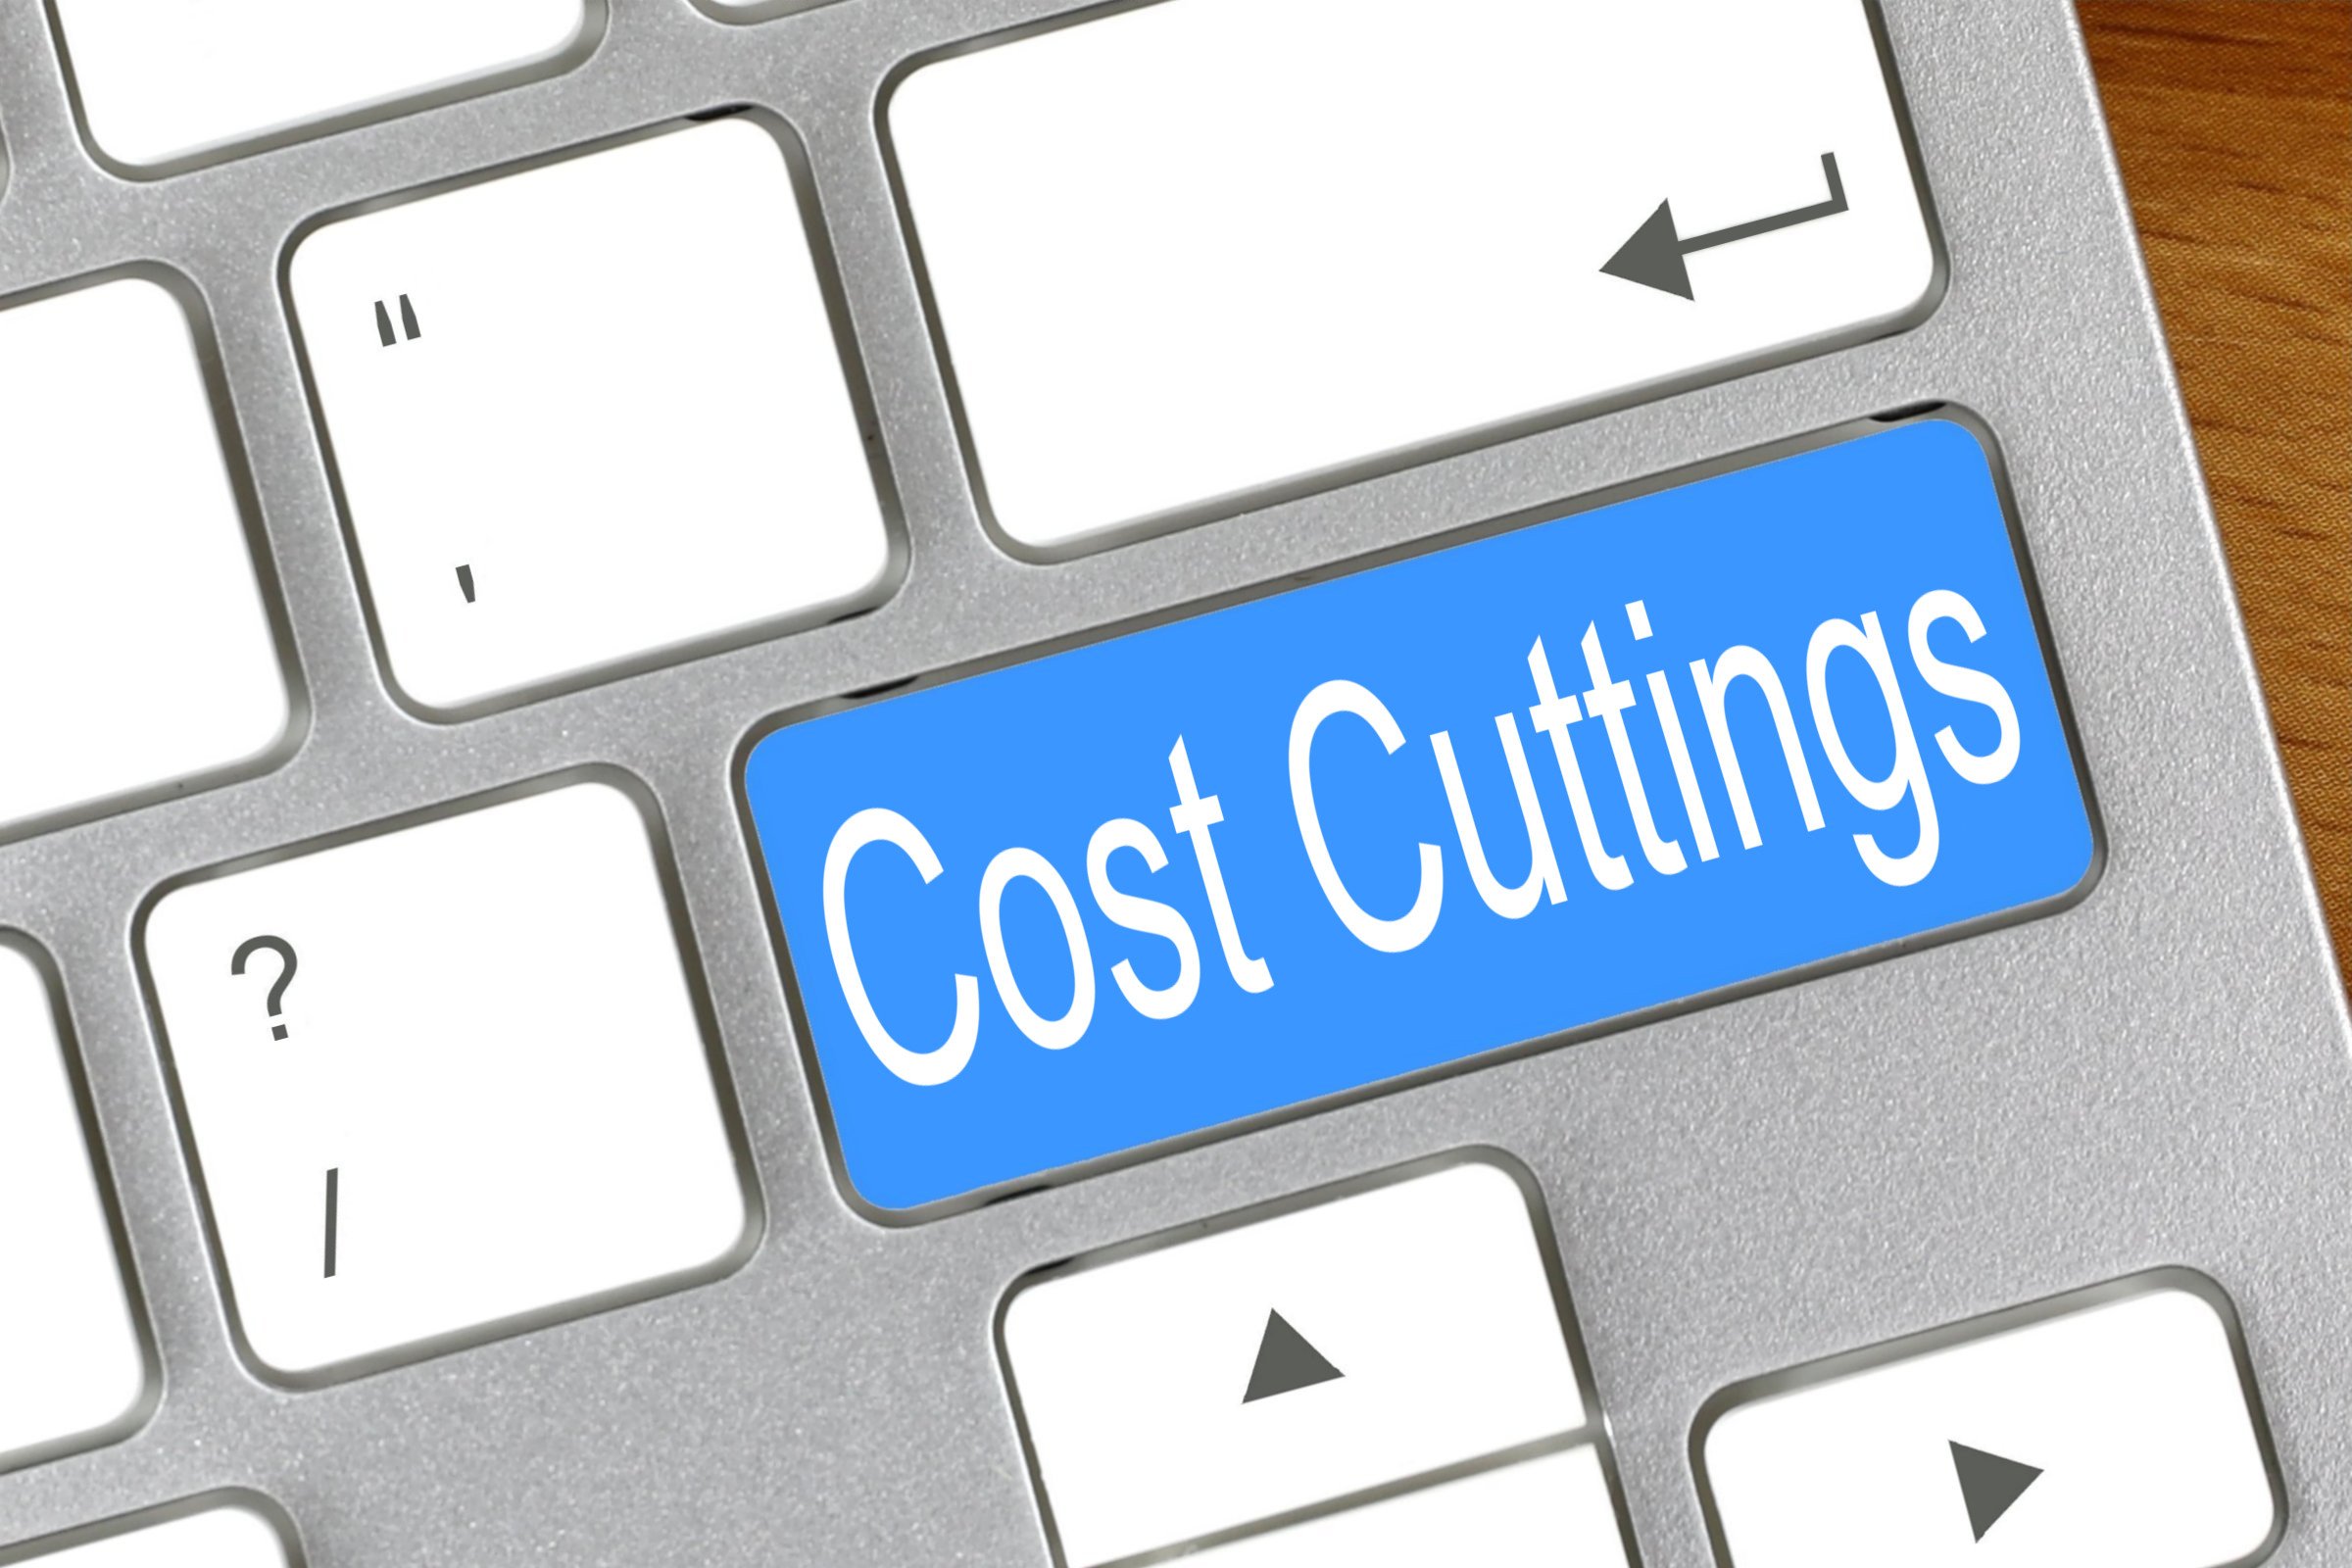 cost cuttings